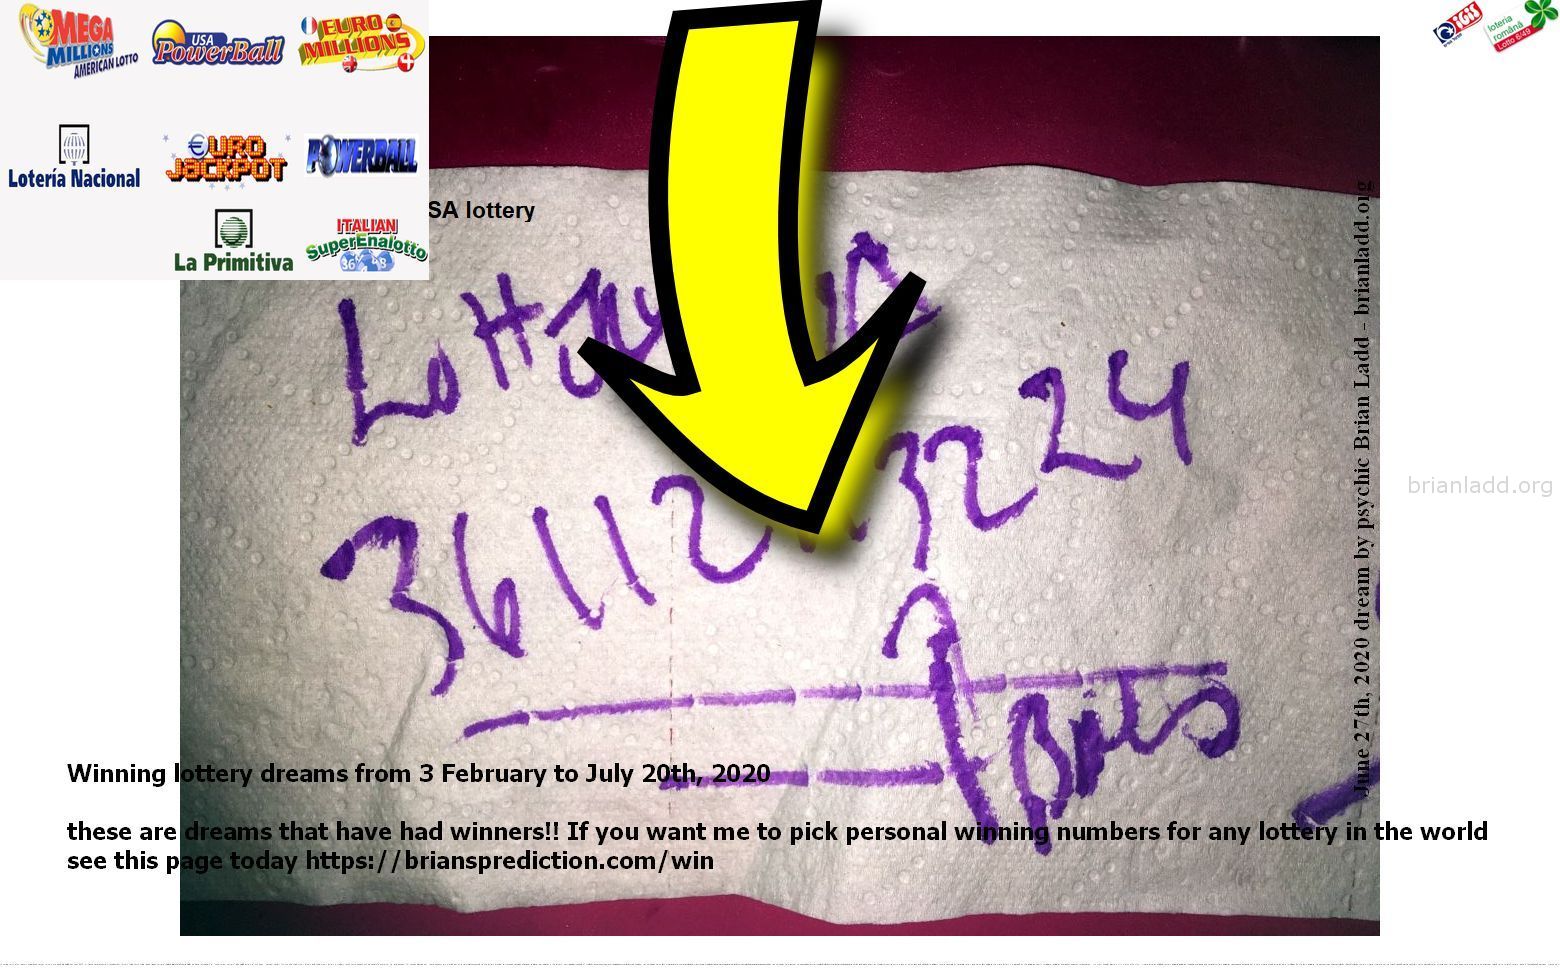 Winning Lottery Dreams From The 3Rd Of February To July 20Th 2020 These Are Dreams That Have Had Winners21 Dream Info 13...
Winning Lottery Dreams From 3 February To July 20th, 2020 - These Are Dreams That Have Had Winners!! If You Want Me To Pick Personal Winning Numbers For Any Lottery In The World See This Page Today  https://briansprediction.com/Win  ( NEW!  Free lottery picks by mail, I will personally fill out your blank lottery sheet and mail it back to you for free, postage is included!  visit  https://briansprediction.com/picksbymail   )
